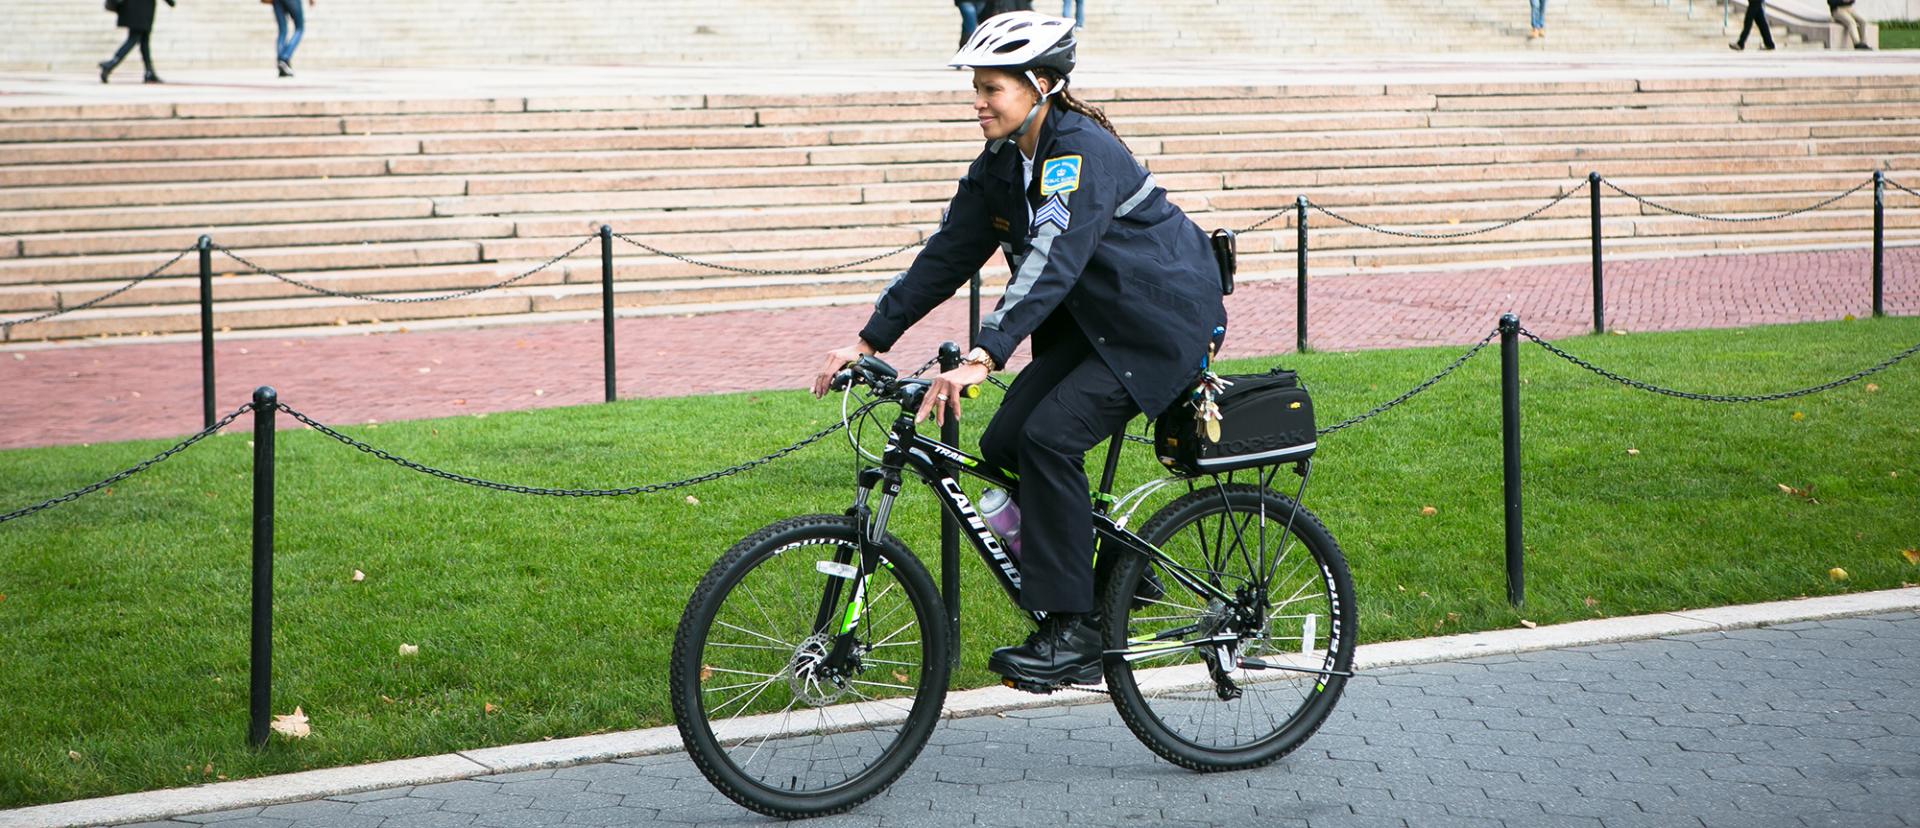 Officer on bicycle